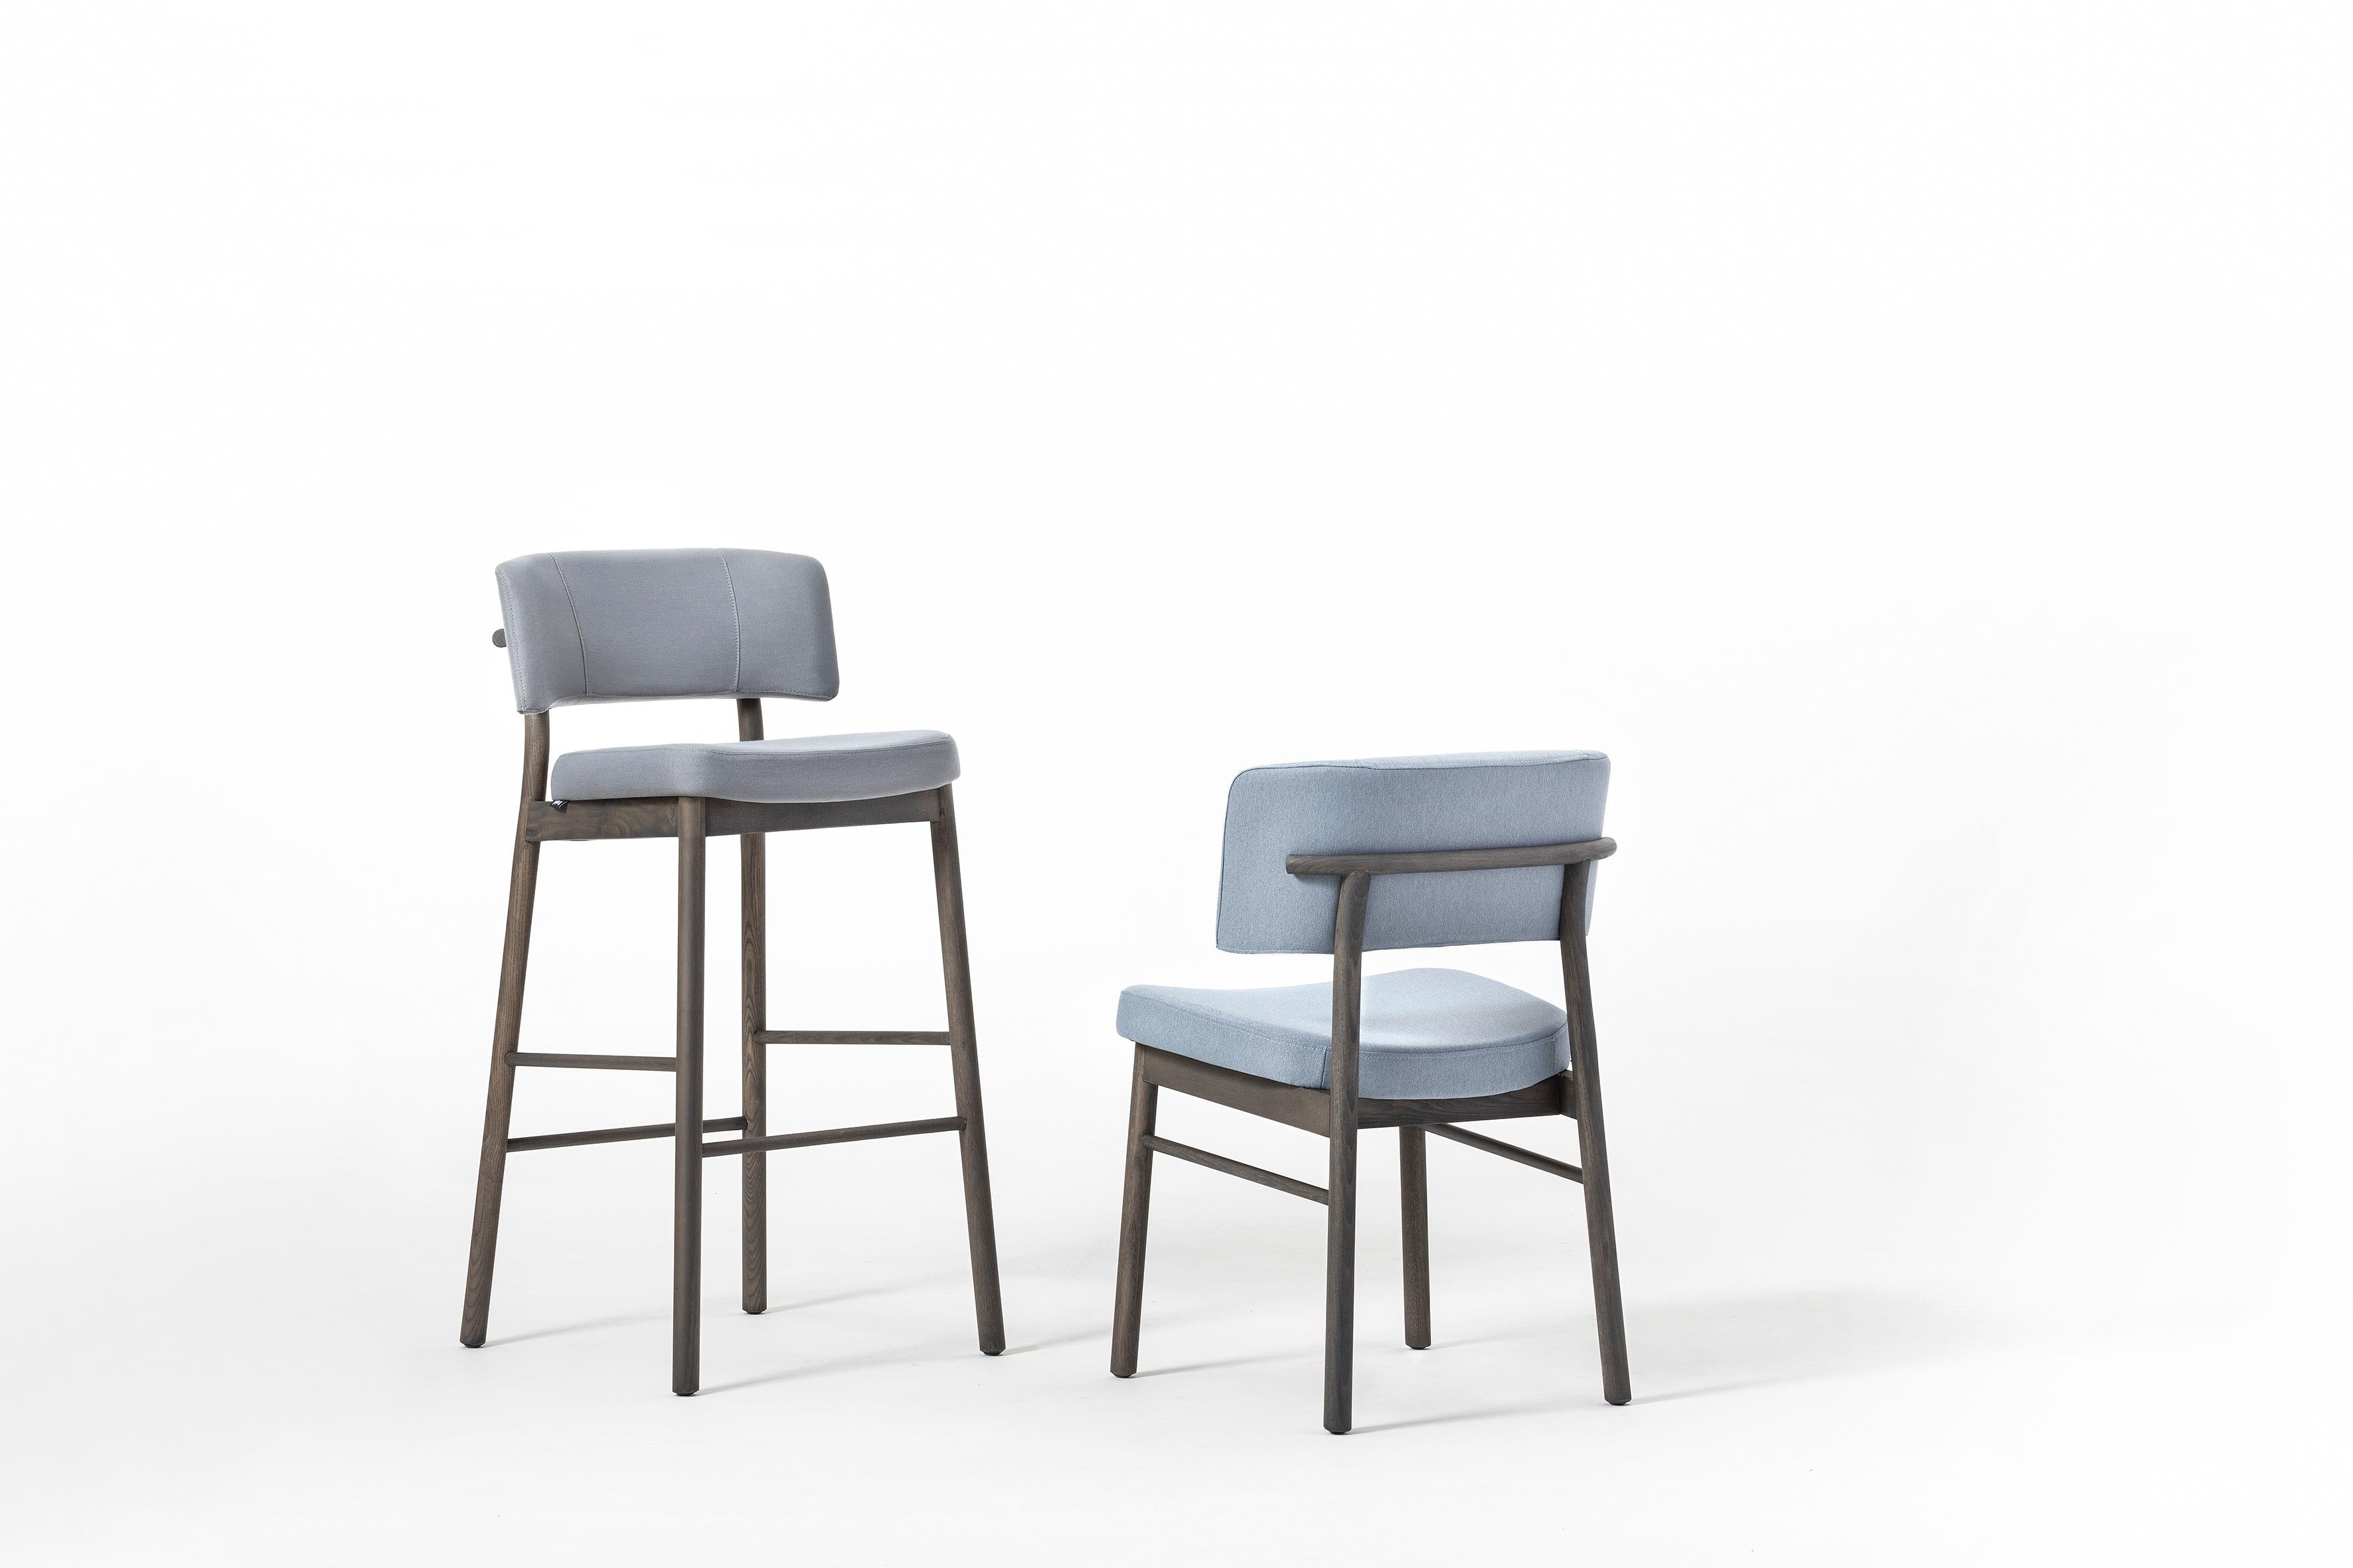 Modern Marlen Chair 0151 LE Red, Blue, Green, Grey, Chair, Living, Home, Contract, Wood For Sale